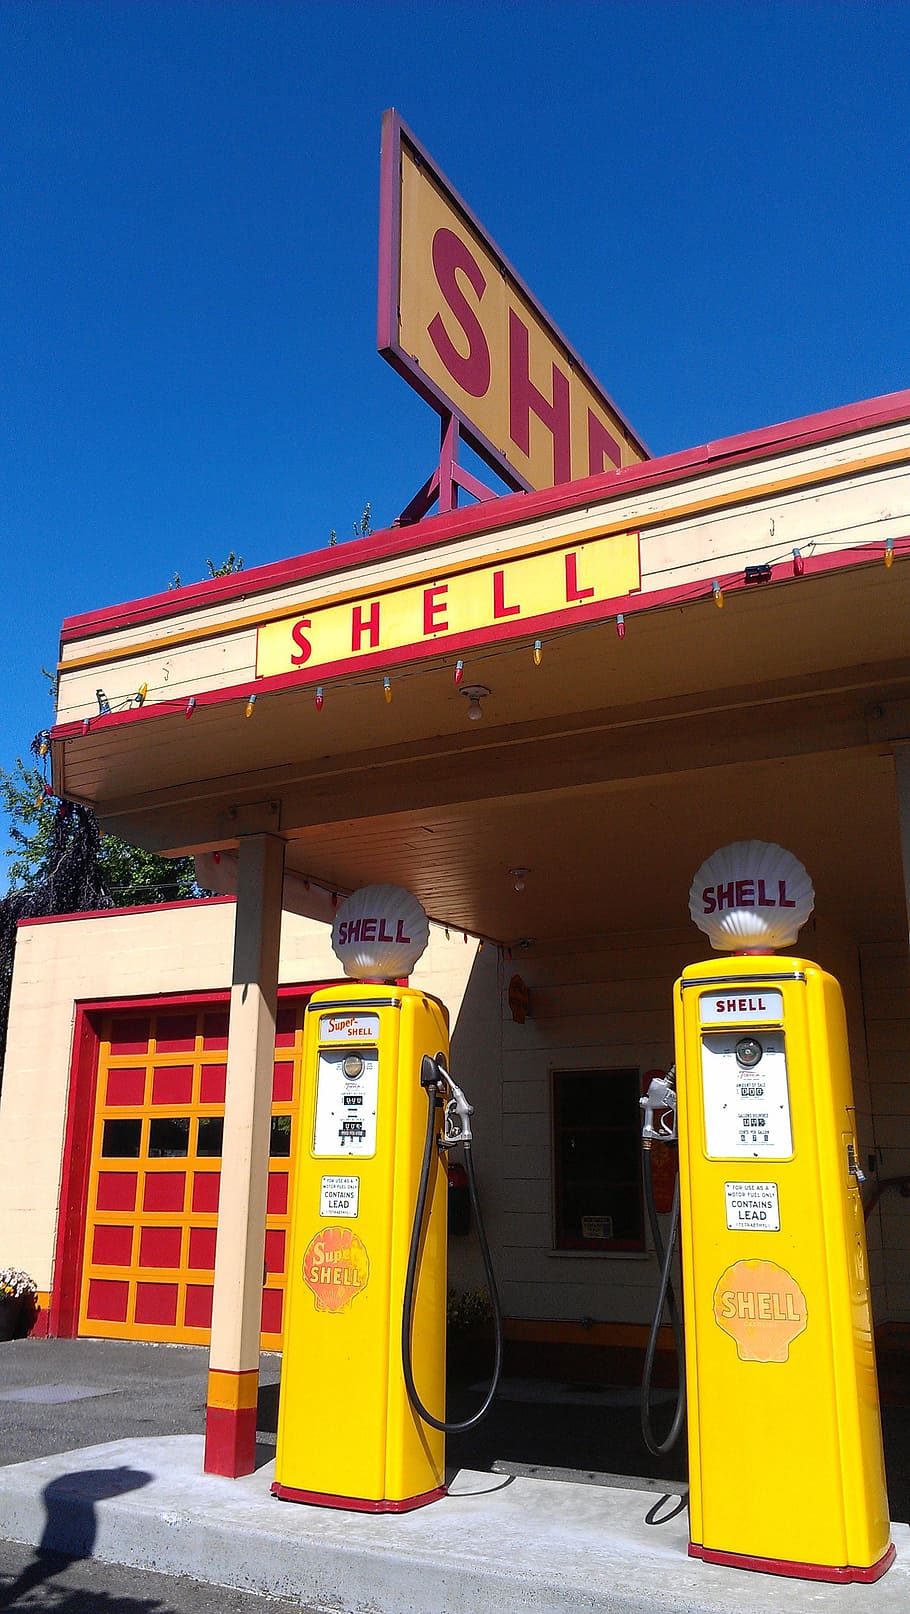 Vintage, Shell, Gas Station, shell, gas station, yellow gas pump, blue sky, gasoline, fuel pump, refueling, yellow